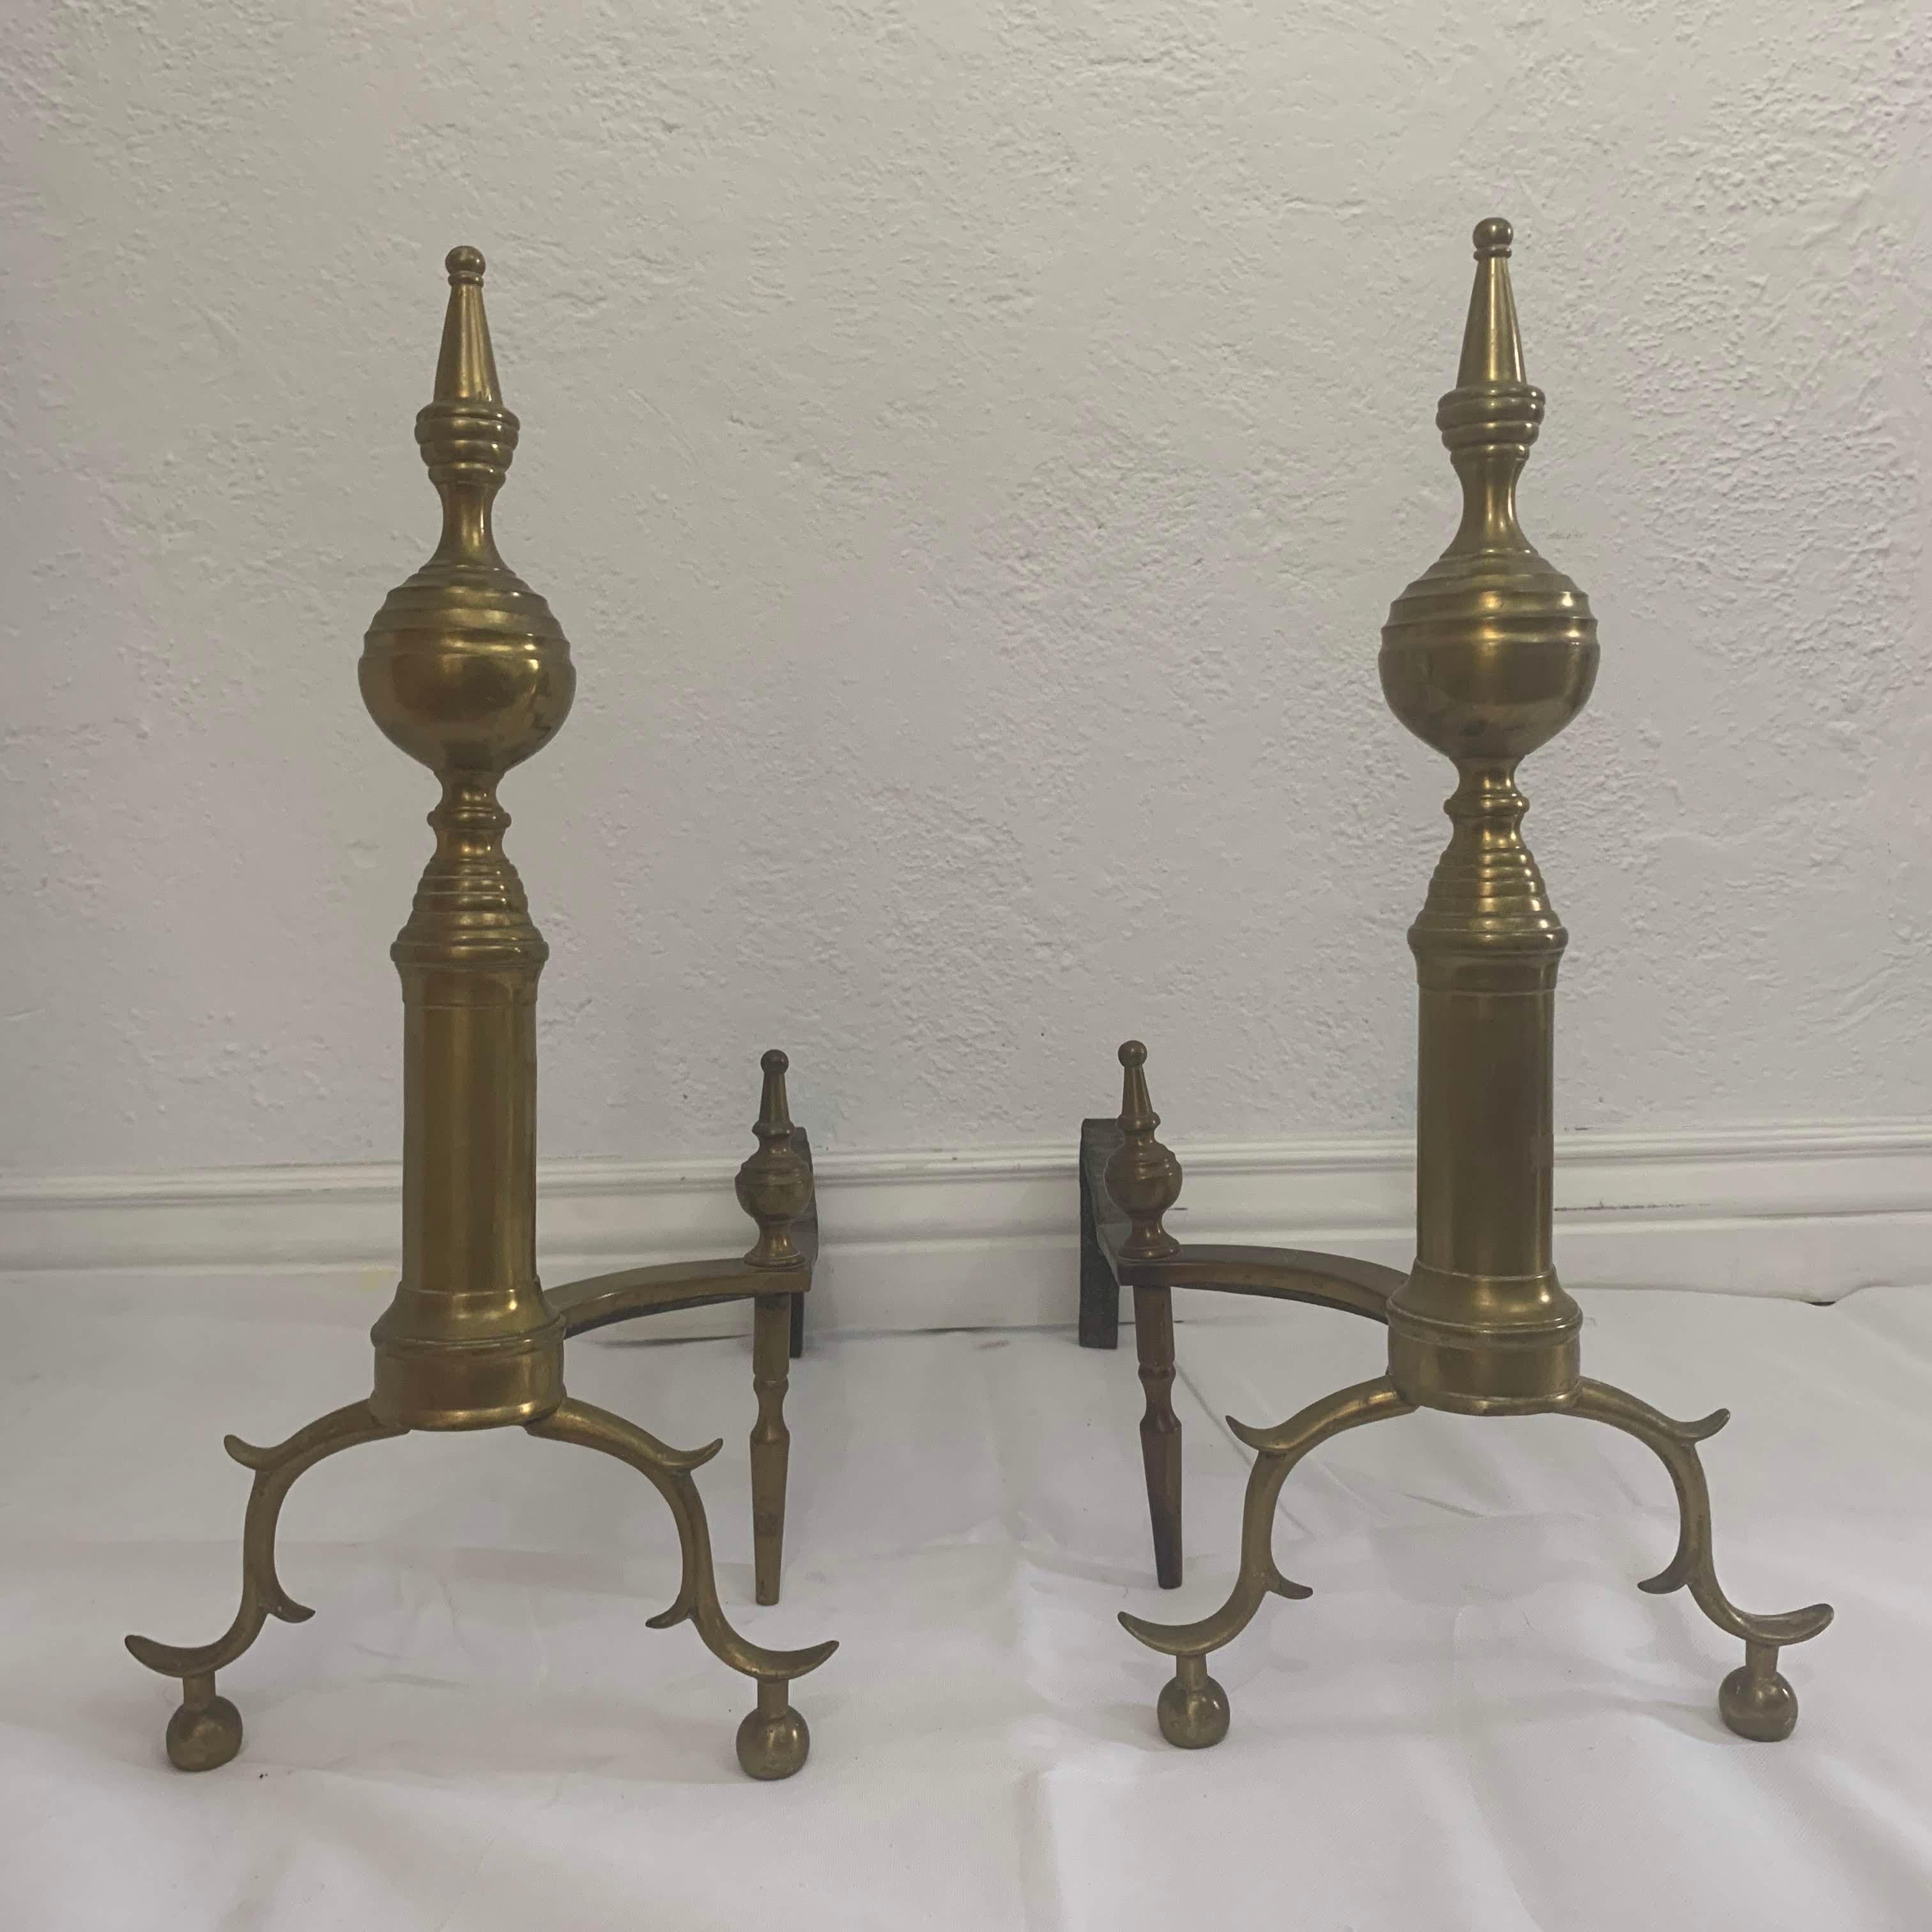 Hand-Crafted 18th Century American Brass Steeple Top Andirons - a Pair